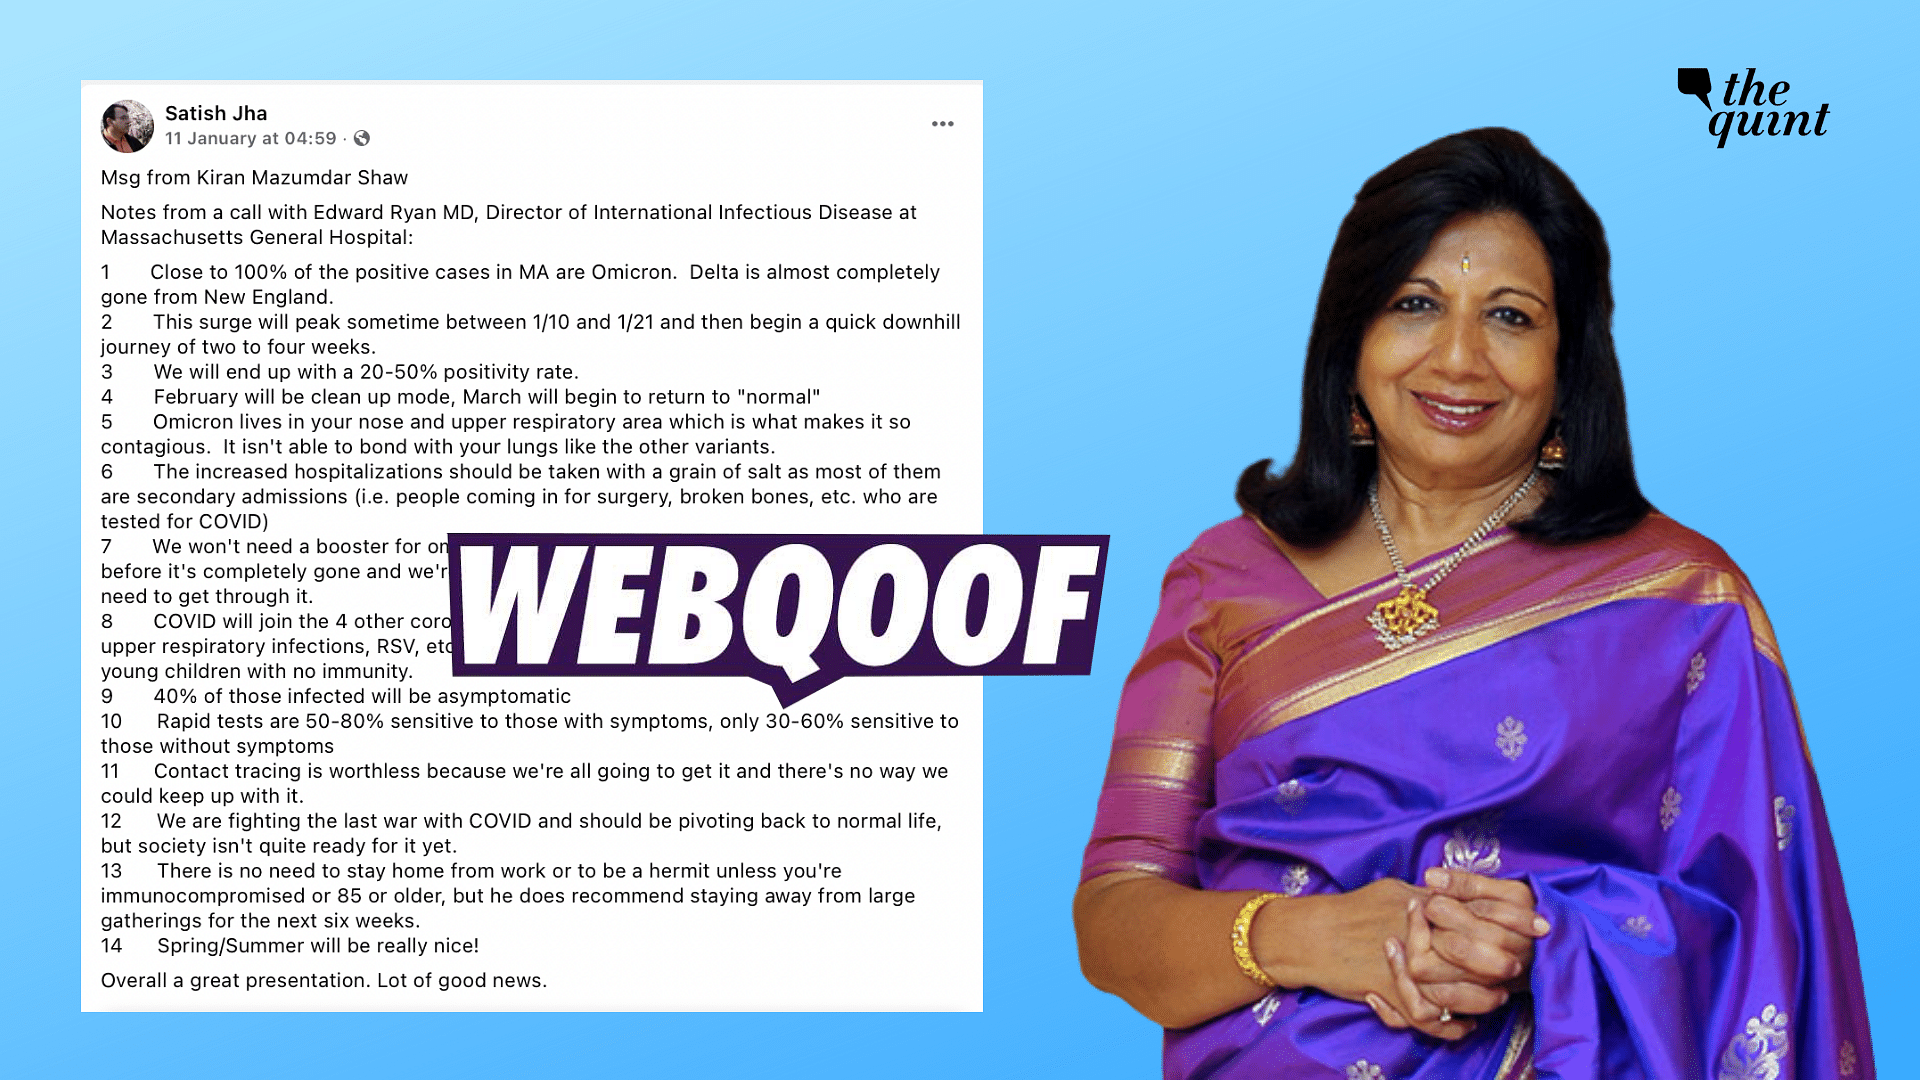 <div class="paragraphs"><p>The 14 point text is being shared, attributing the notes to Biocon chairperson Kiran Mazumdar-Shaw.</p></div>